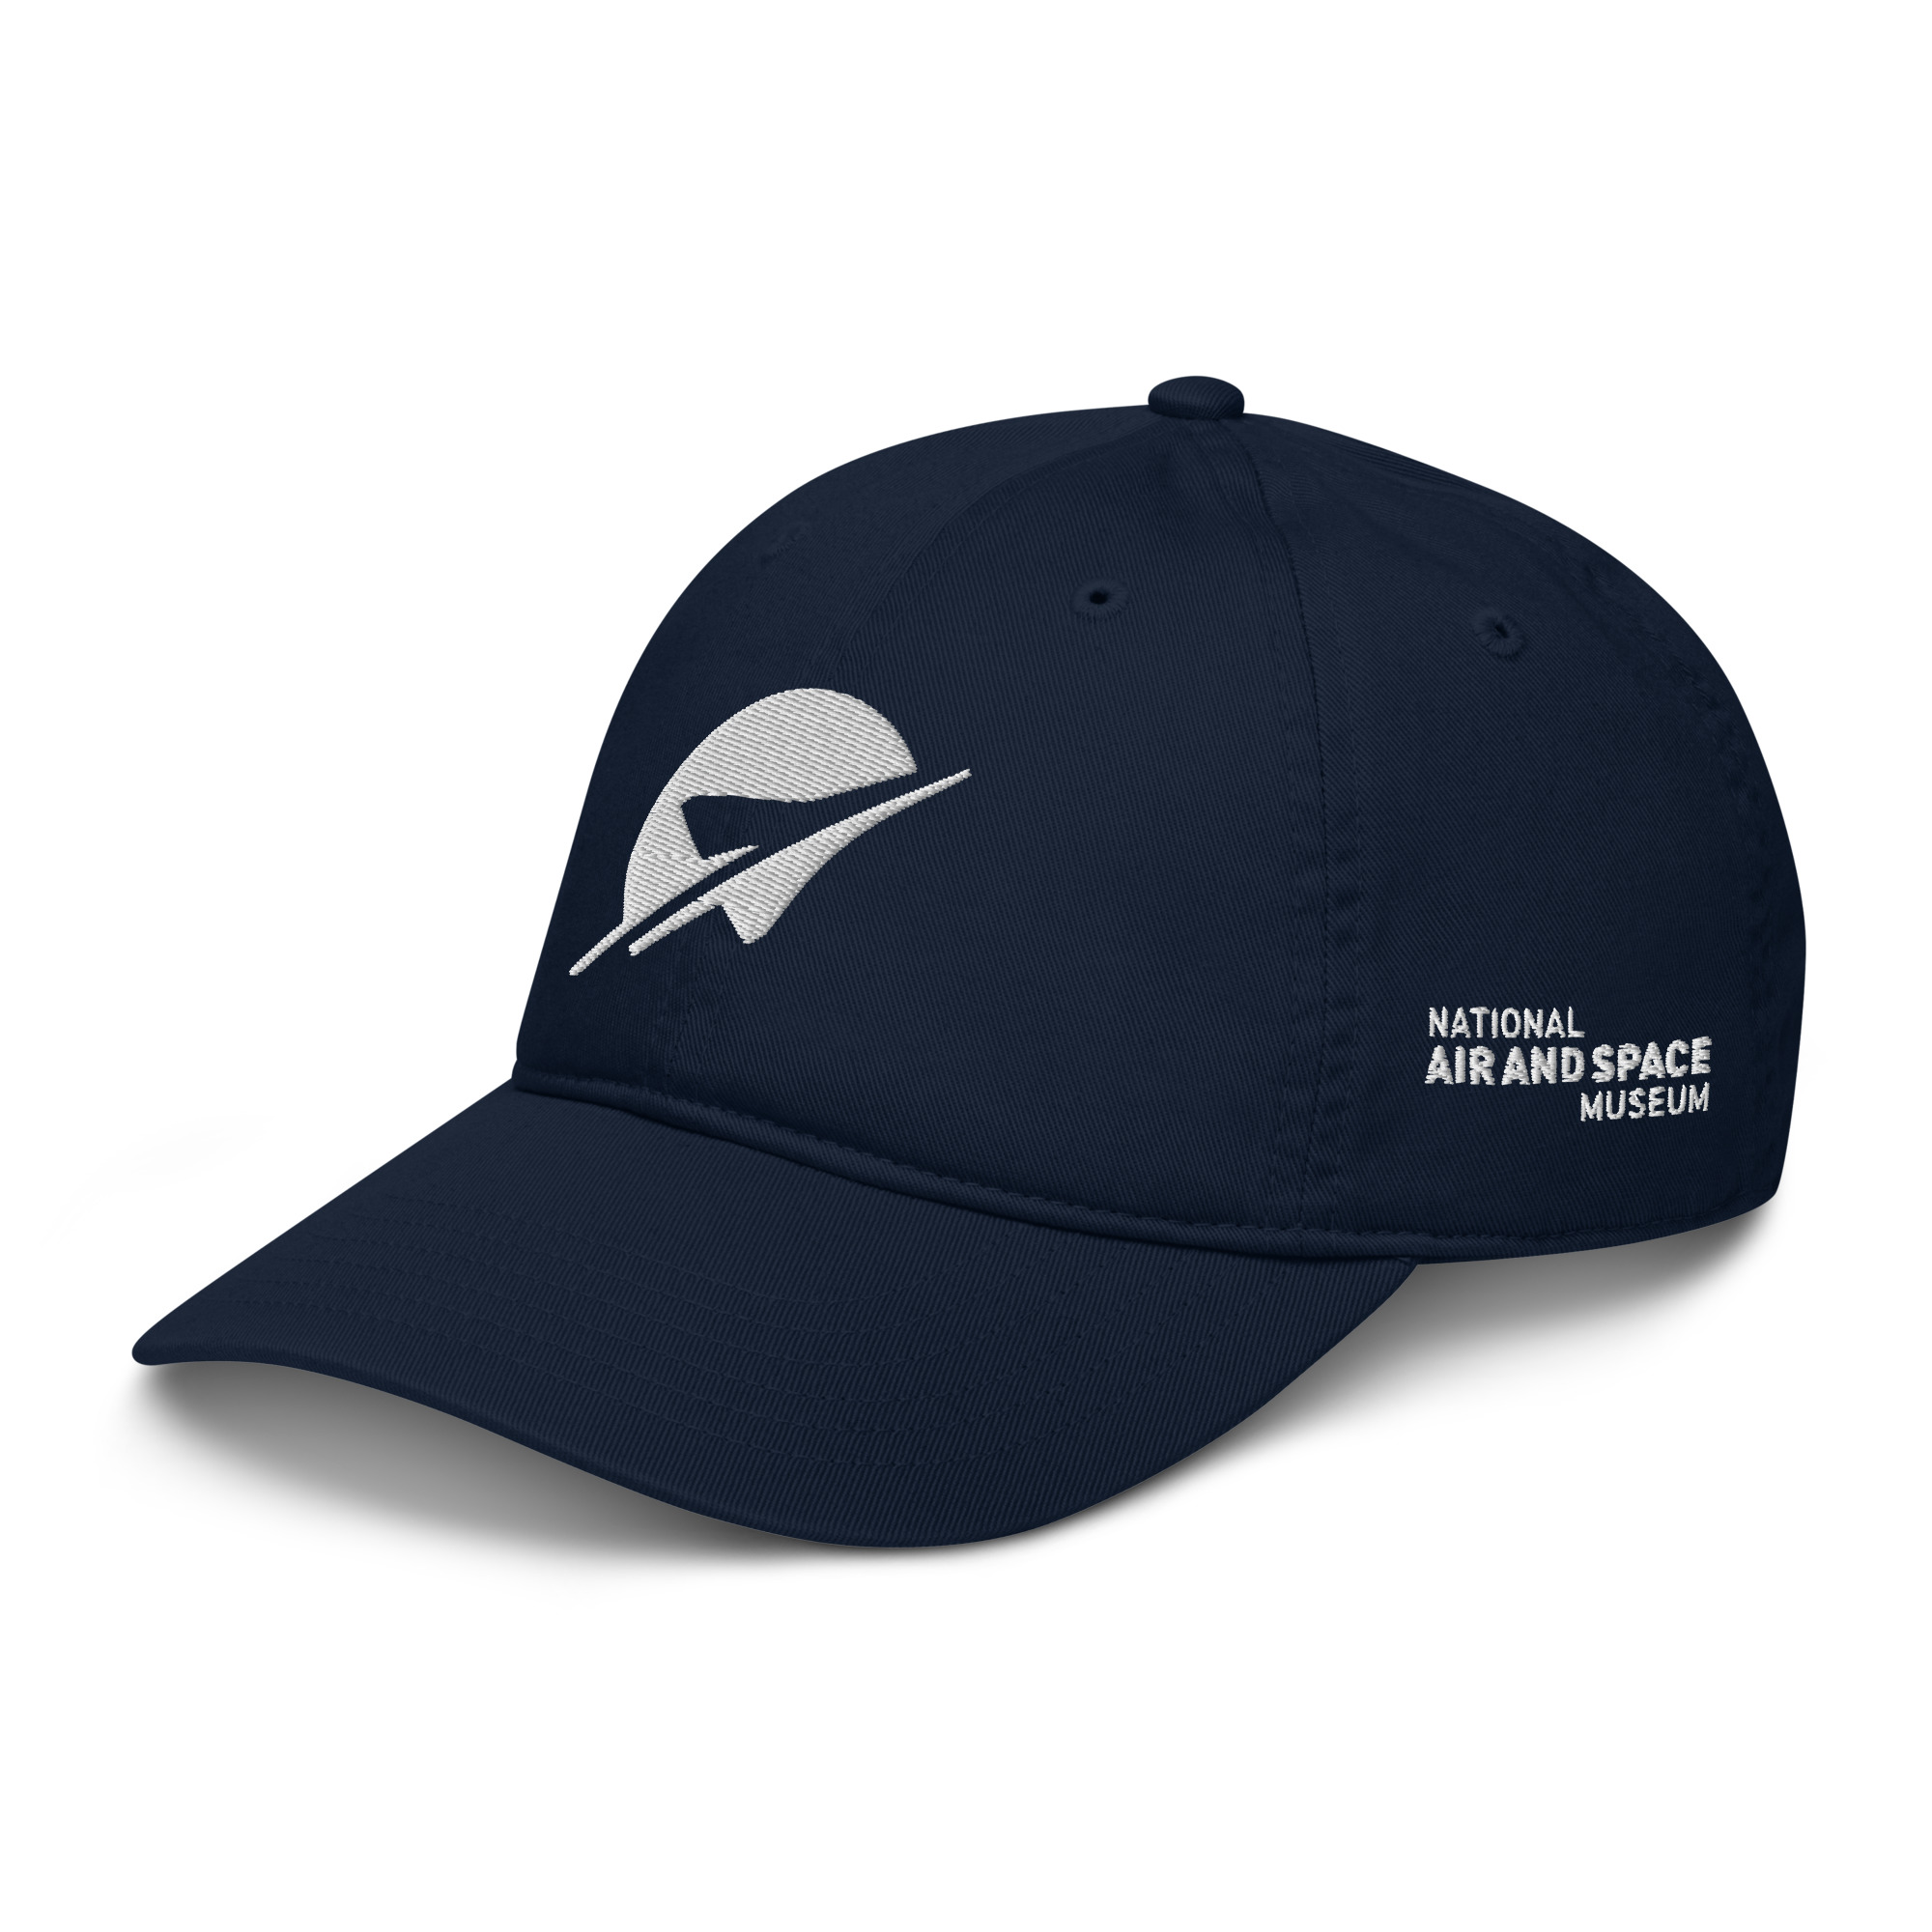 National Air and Space Museum Organic Cotton Hat | Air and Space Merch